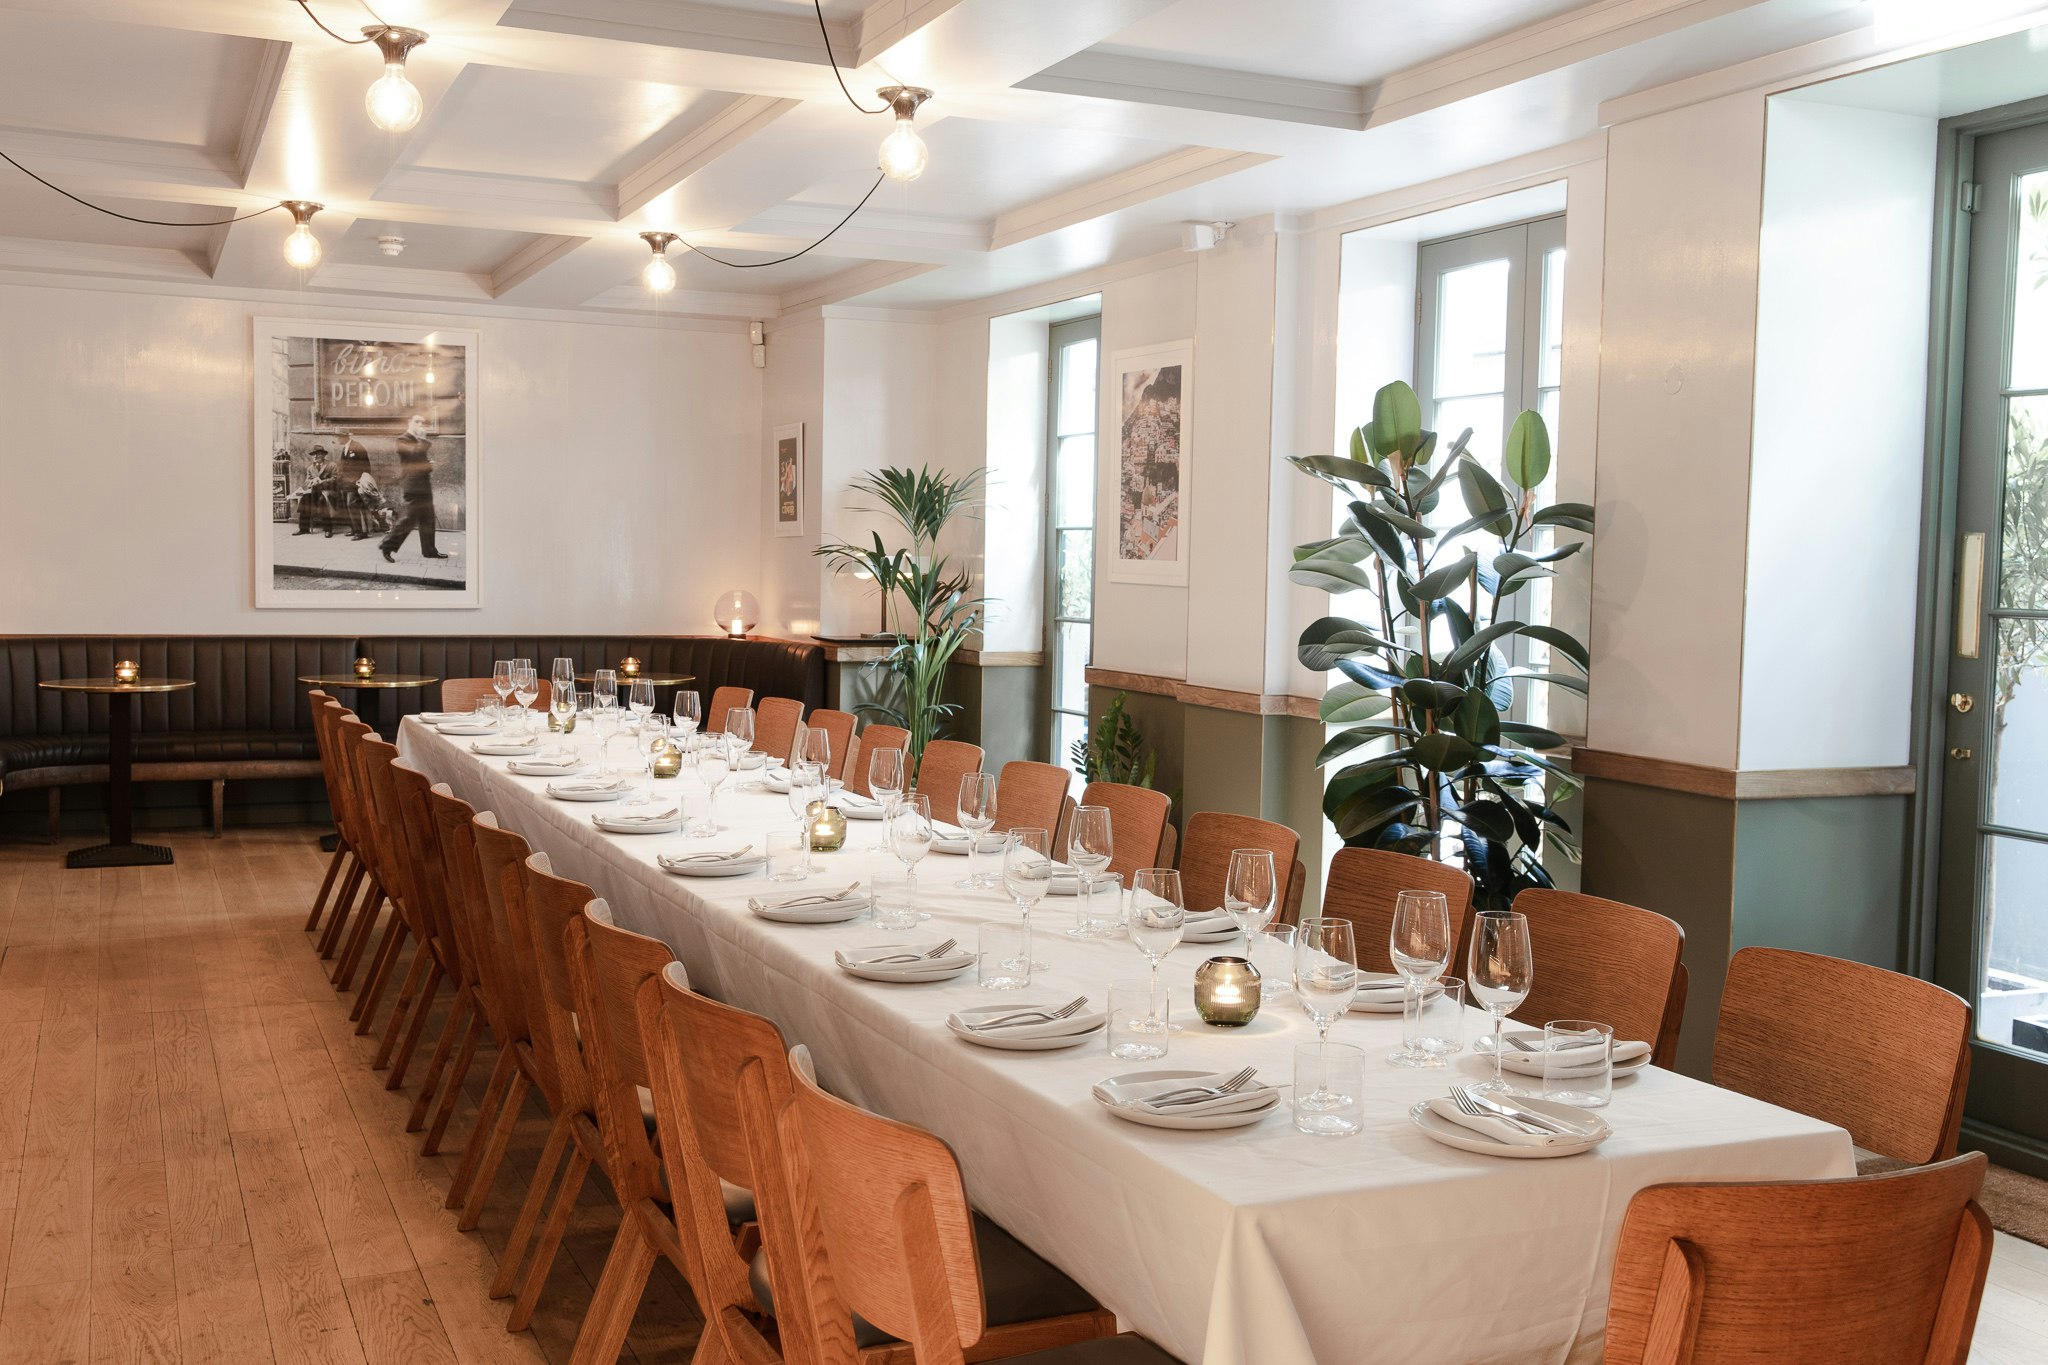 Recently Opened Venues in London - The Italian Greyhound